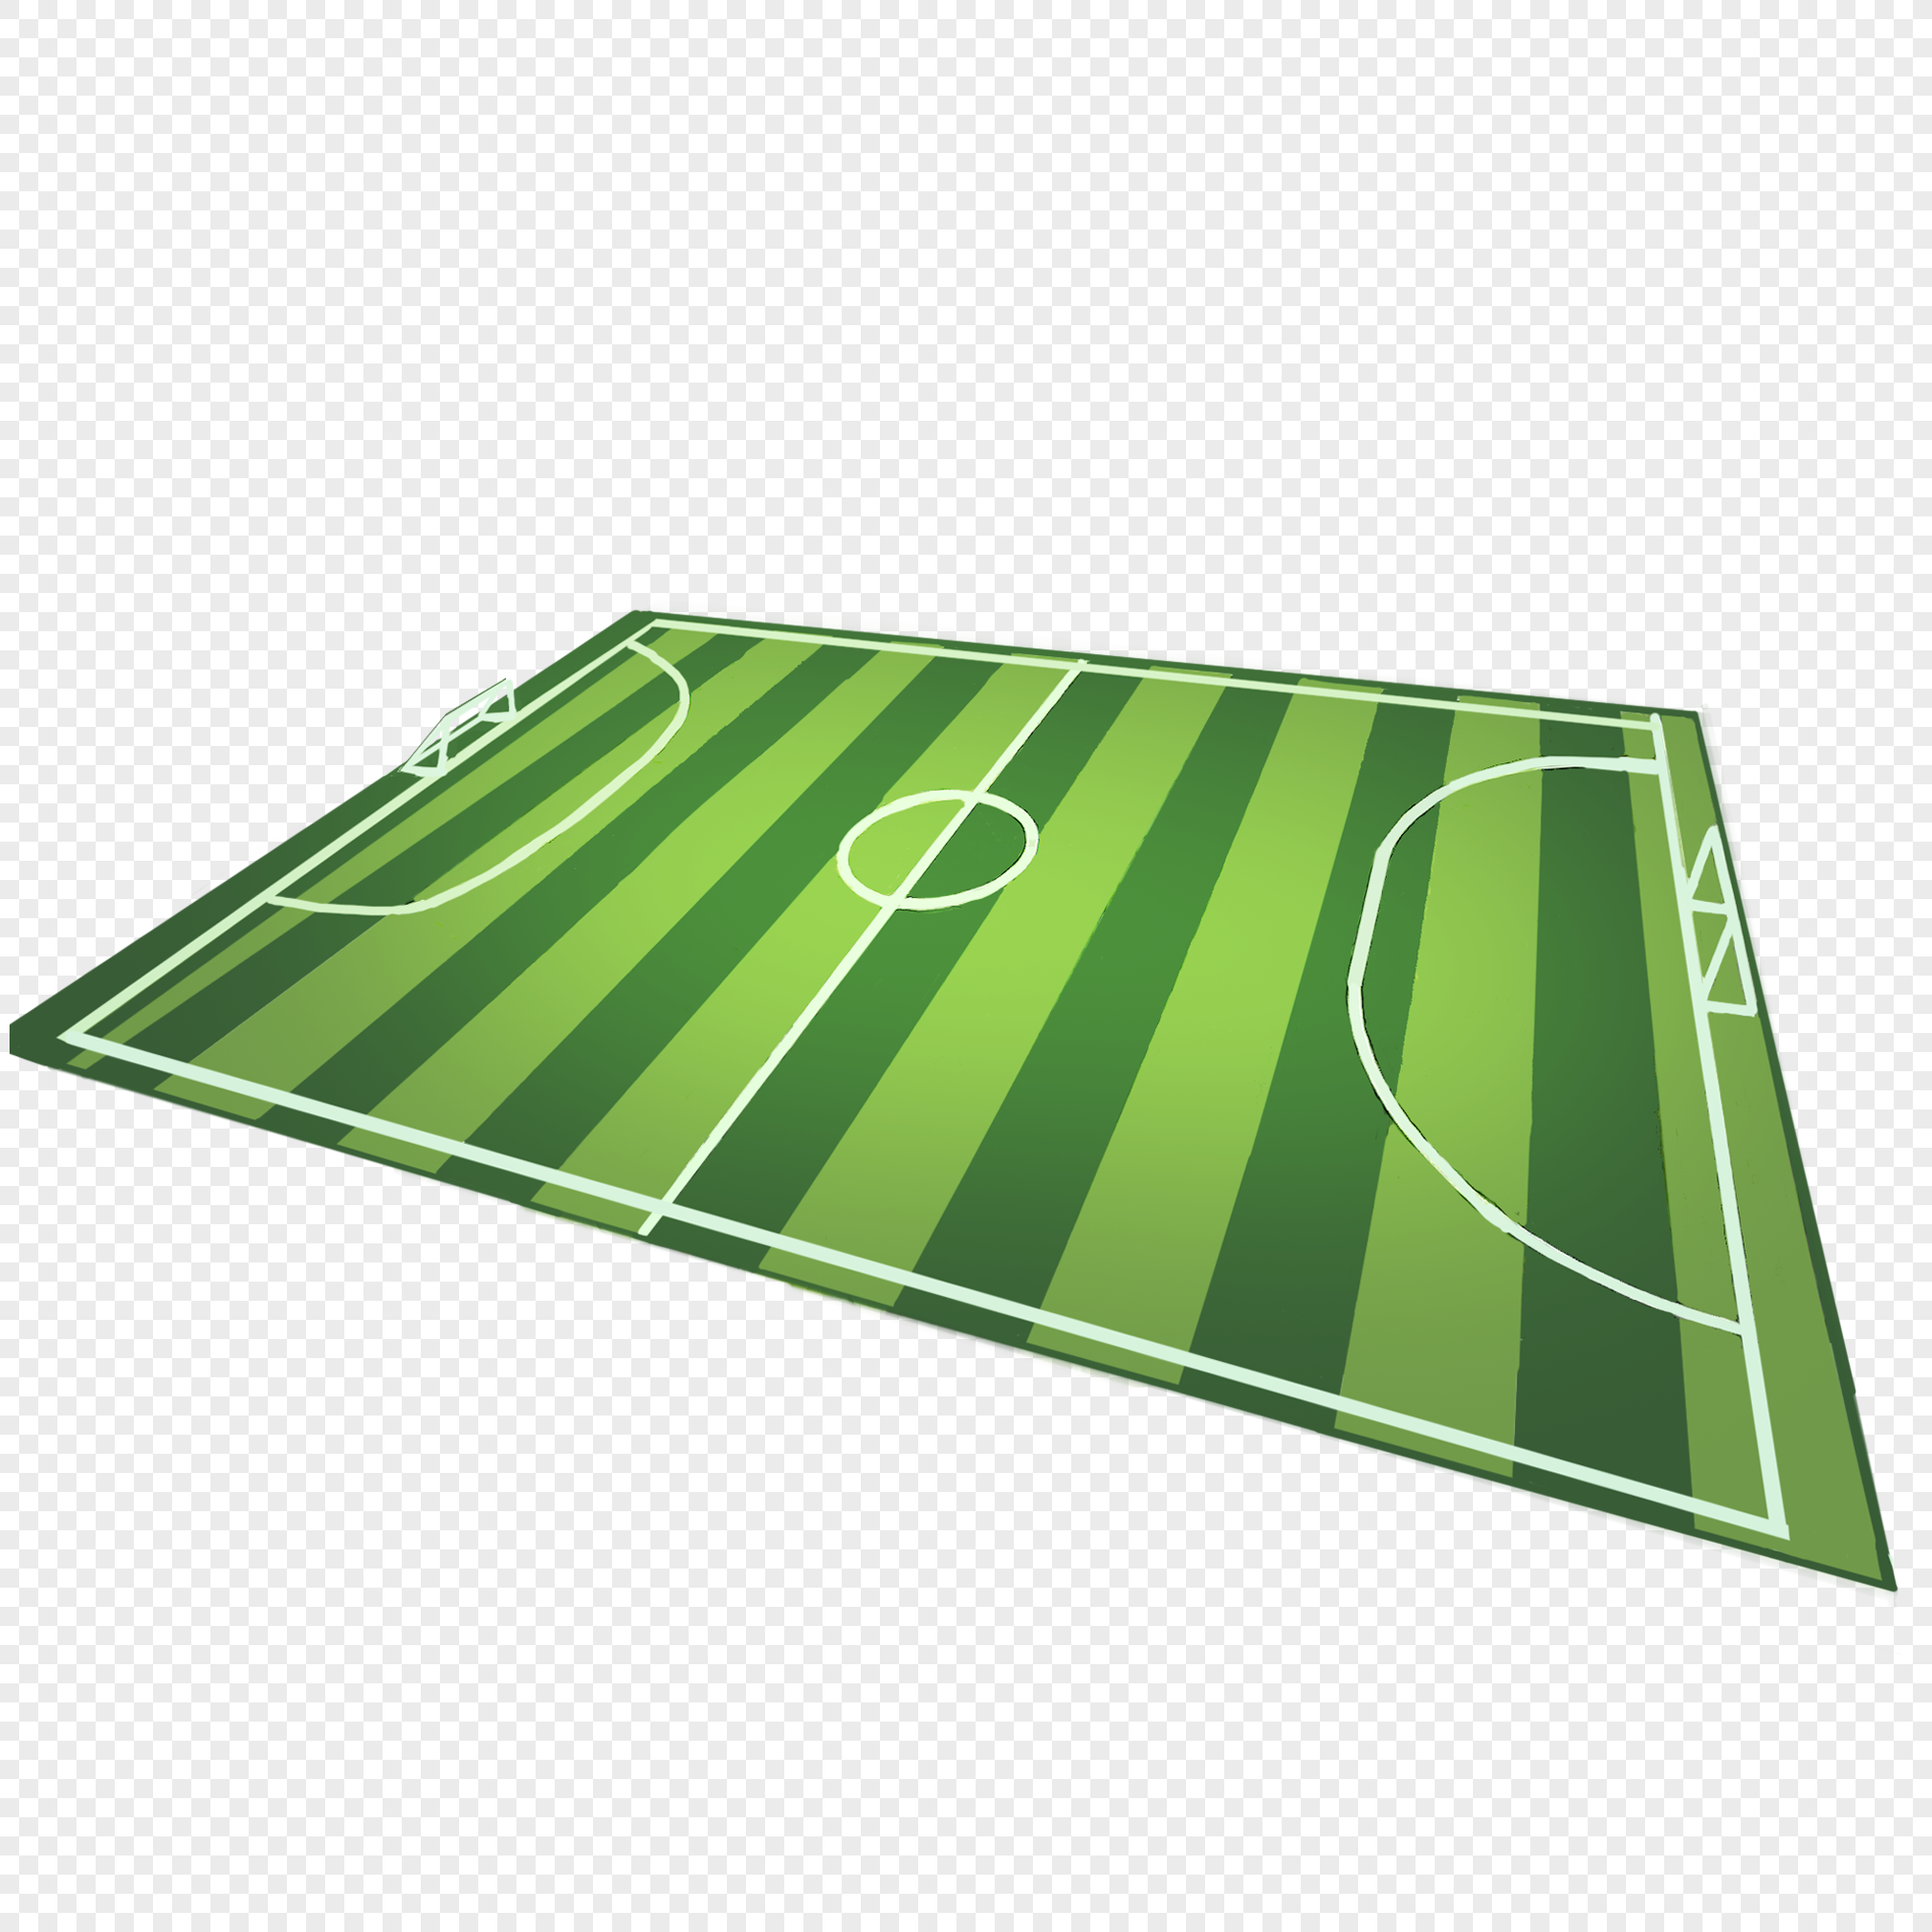 Football Field PNG Transparent Background And Clipart Image For Free  Download - Lovepik | 401229250